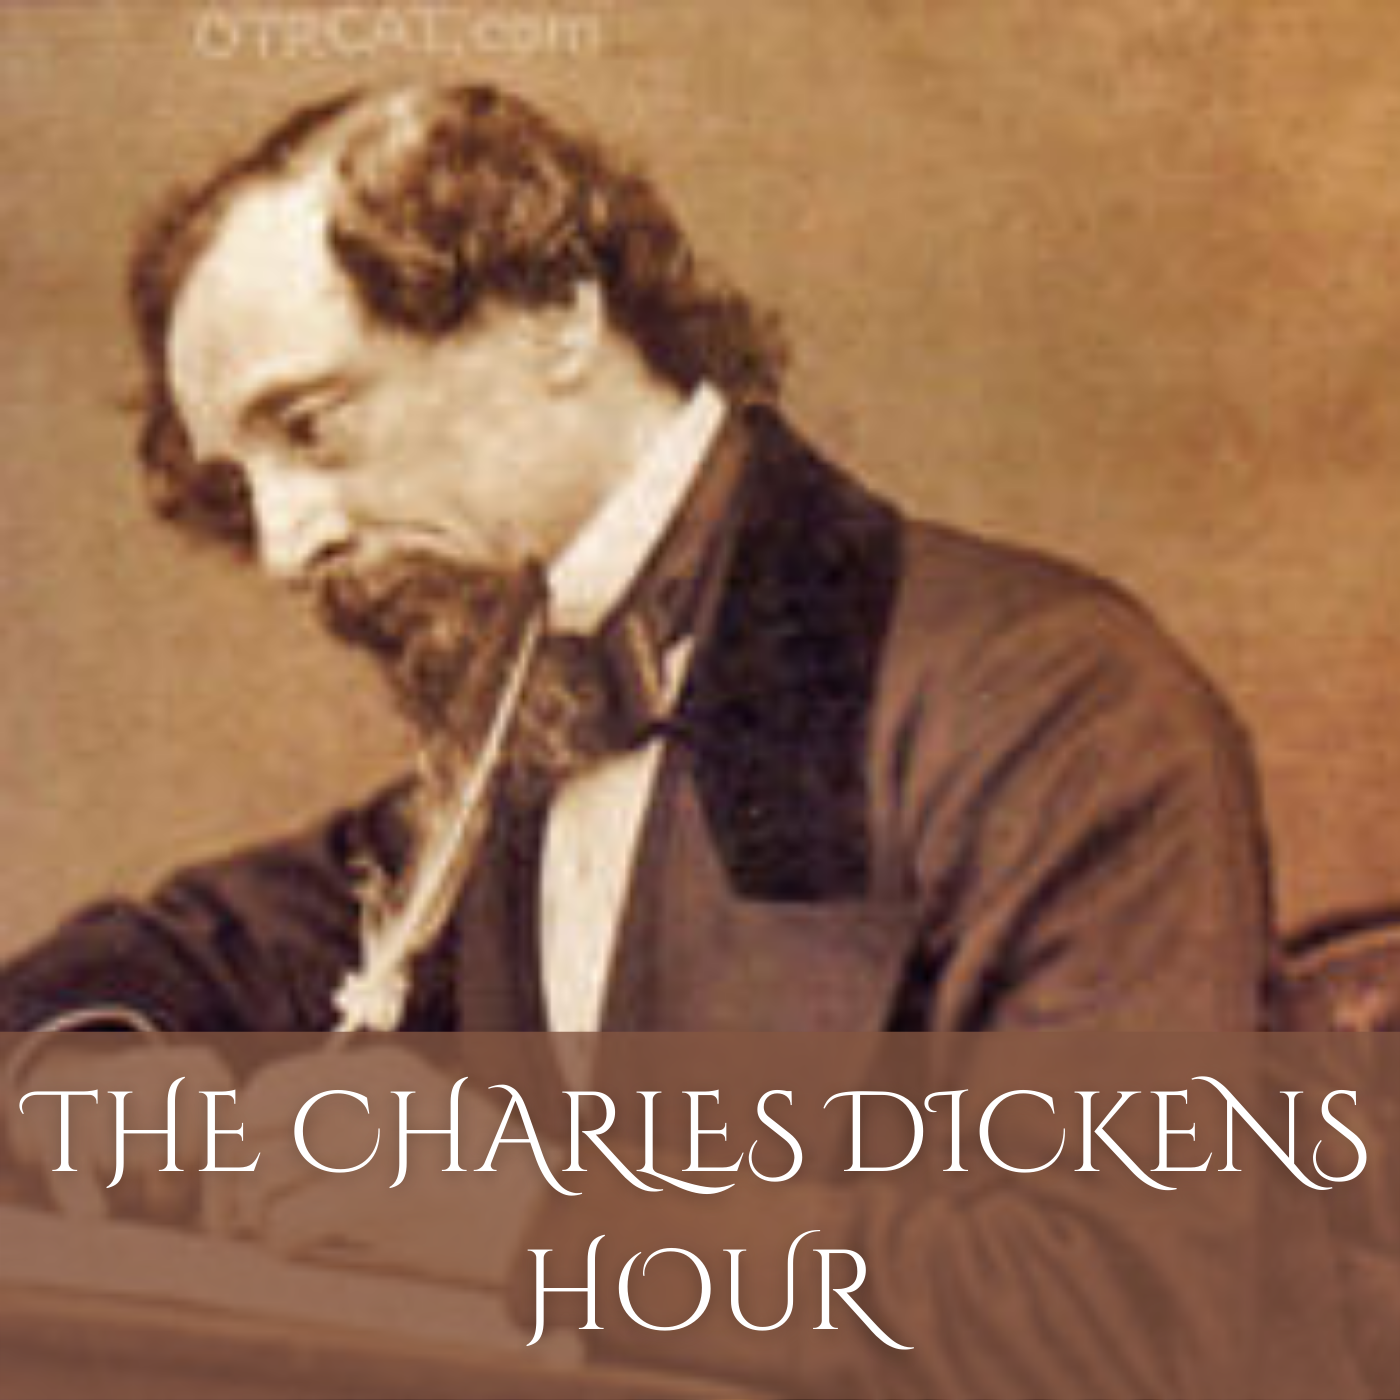 The Charles Dickens Hour